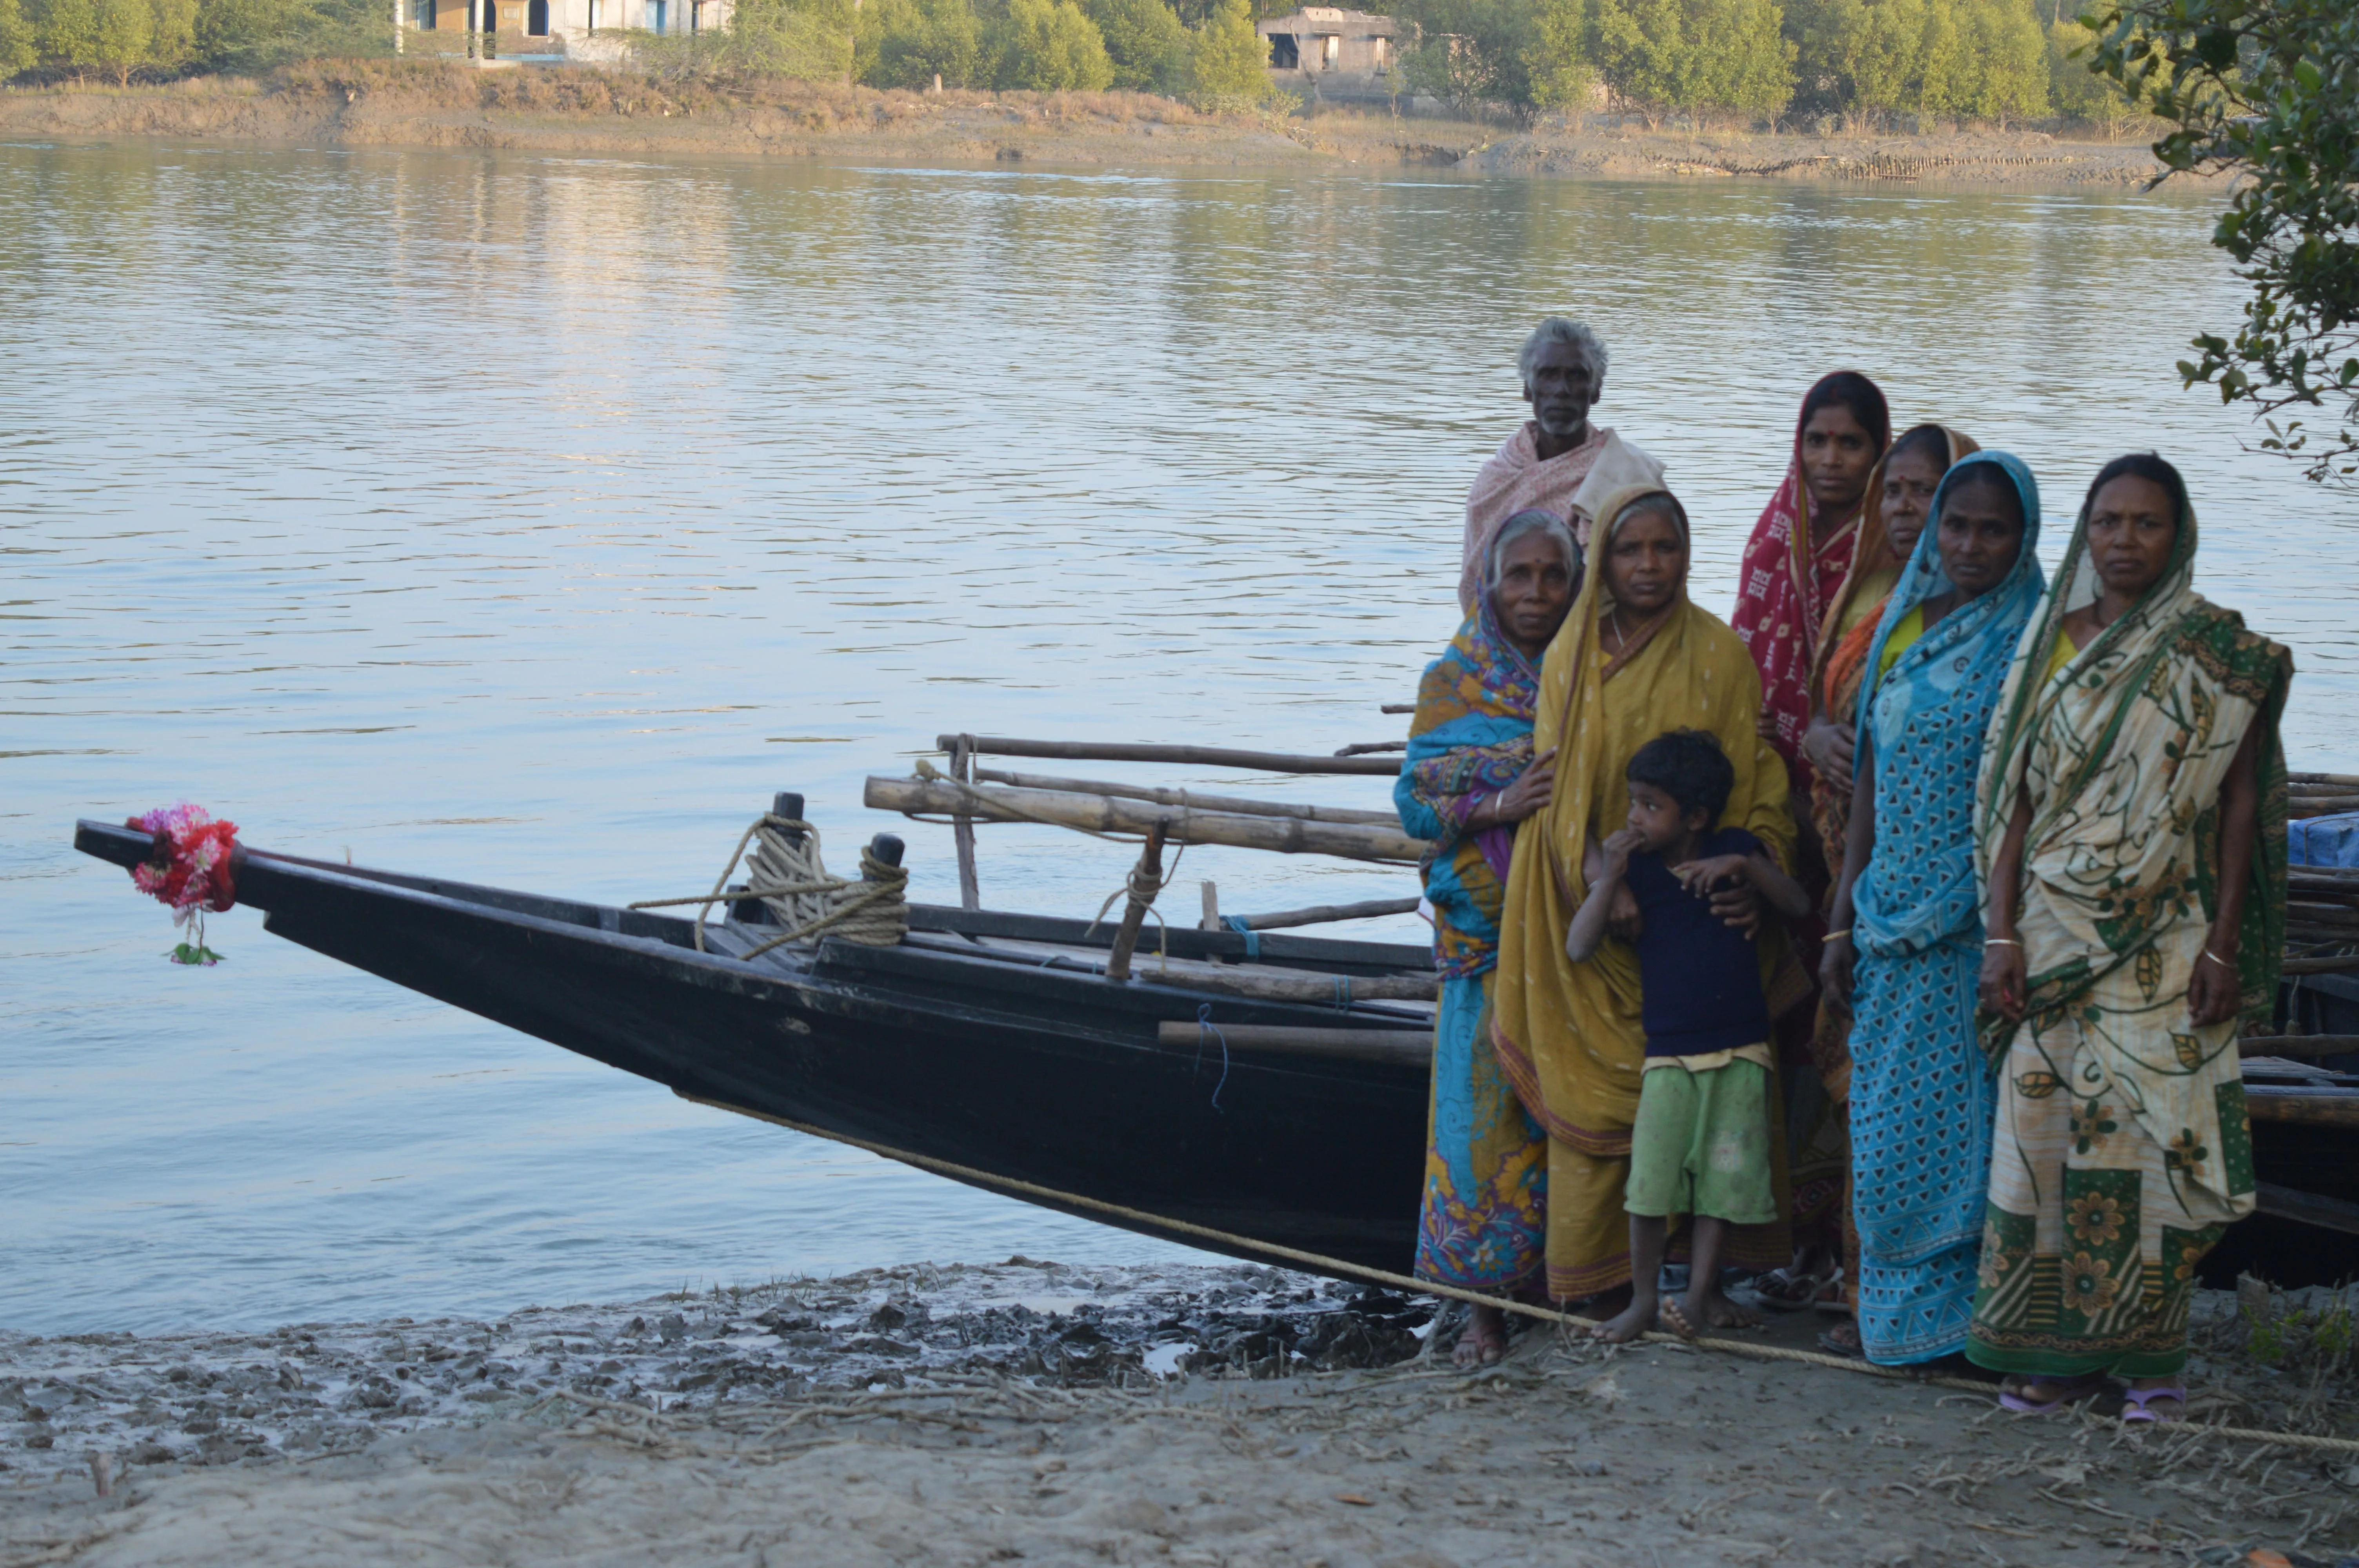 A group of tiger widows standing in front of a boat and a tiger widower standing on the boat in Sundarbans.